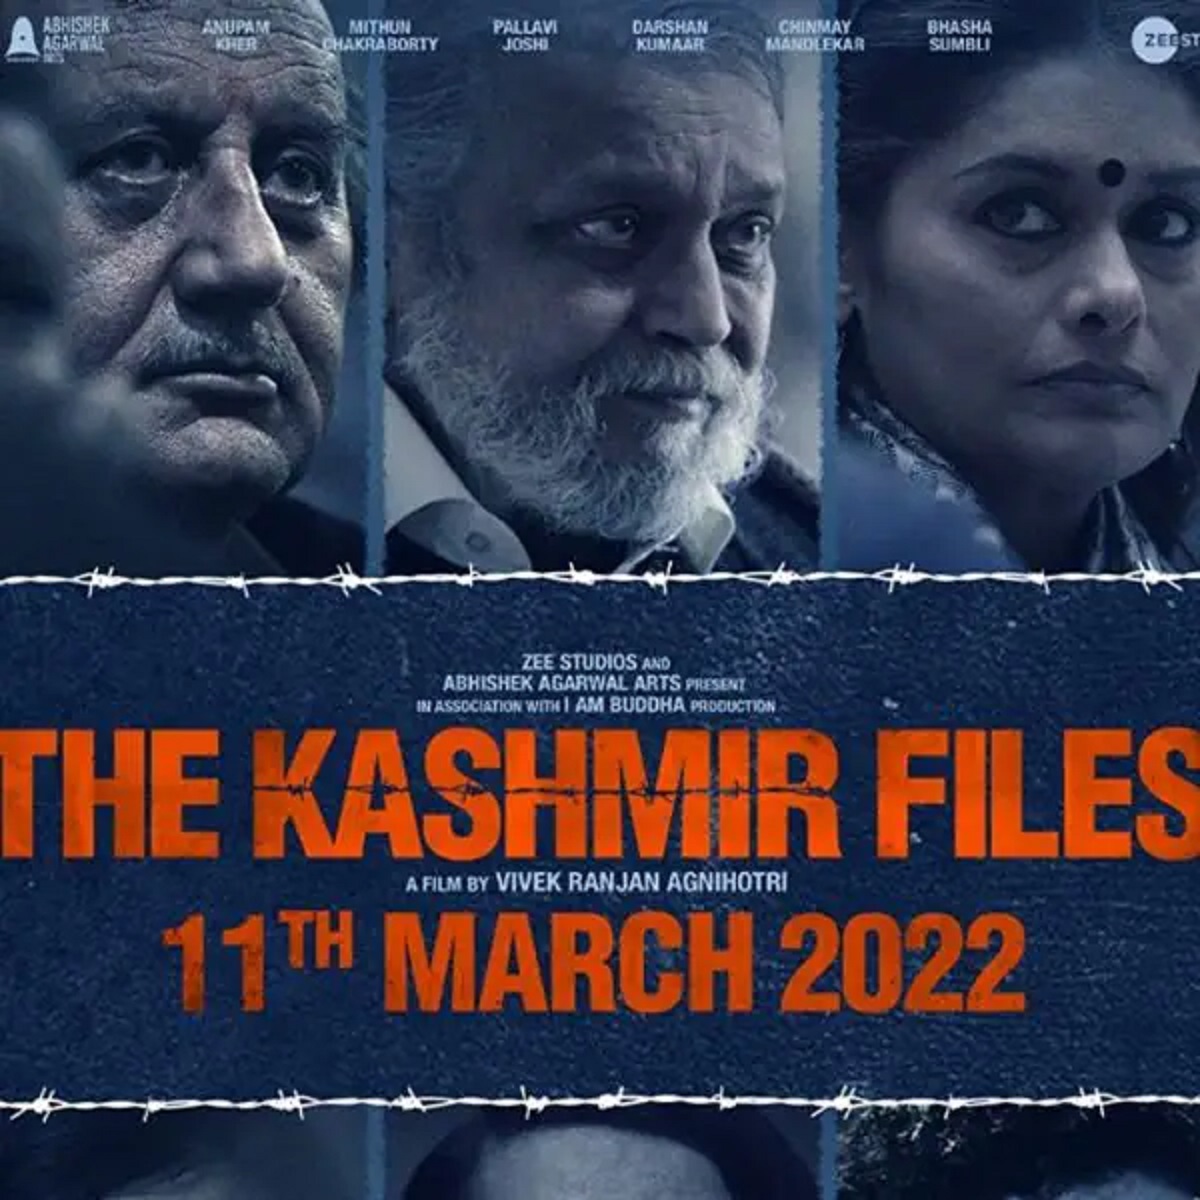 the-kashmir-files-movie-leaked-online-still-available-for-download